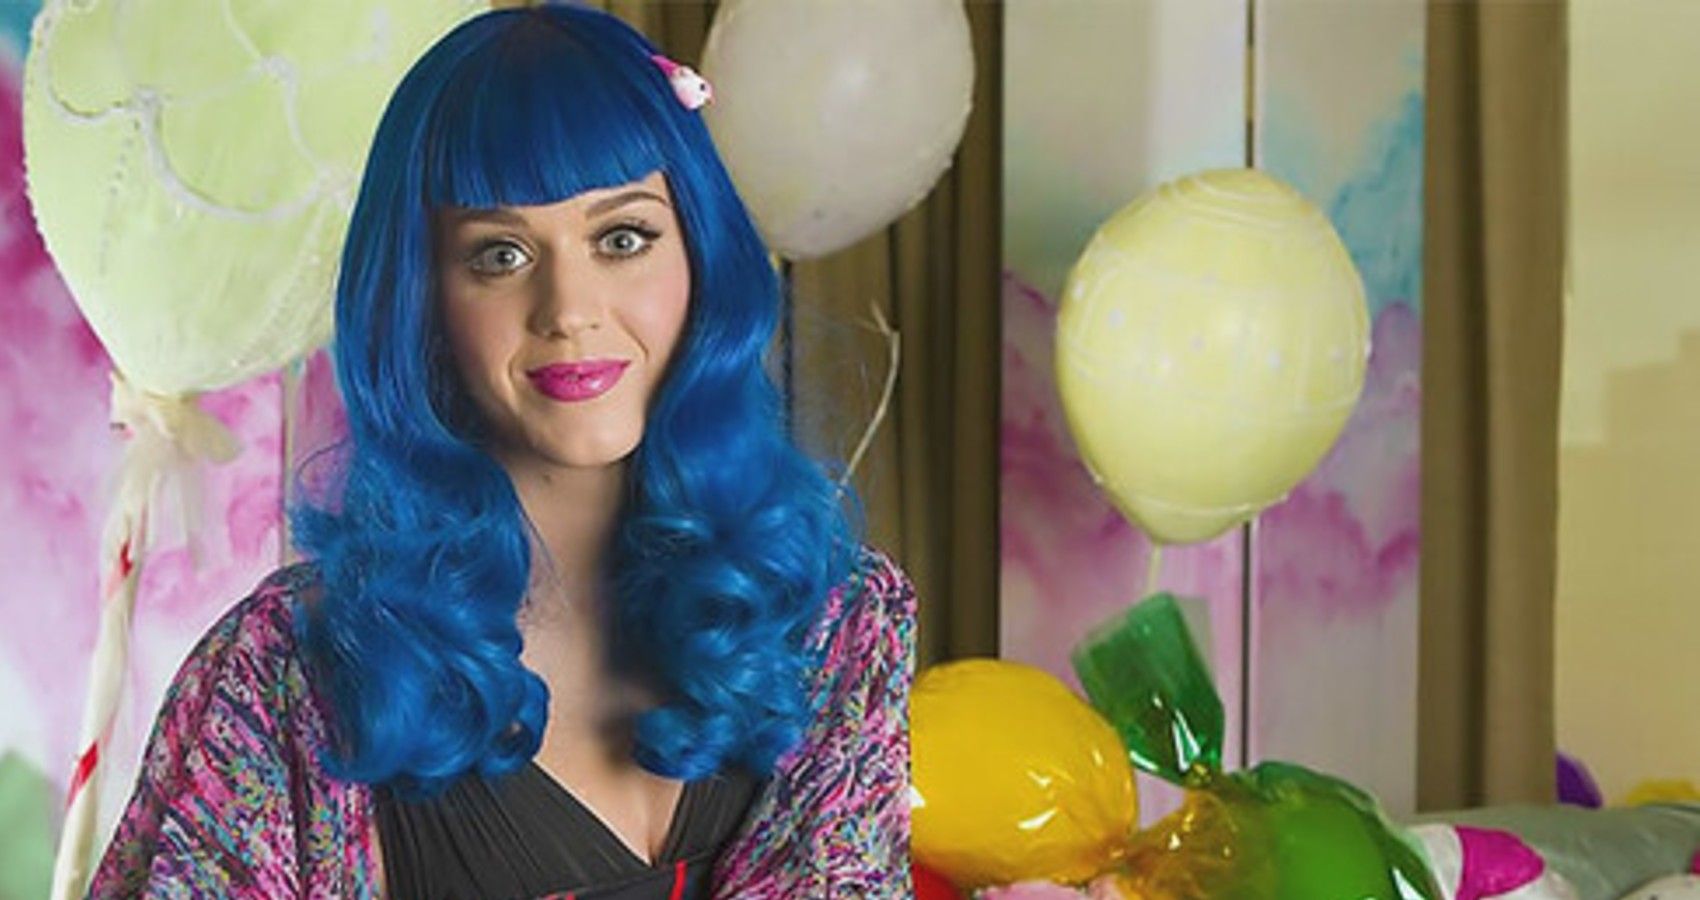 Katy Perry Makes Tiny Vegan Donuts While Talking About Daisy And Mom